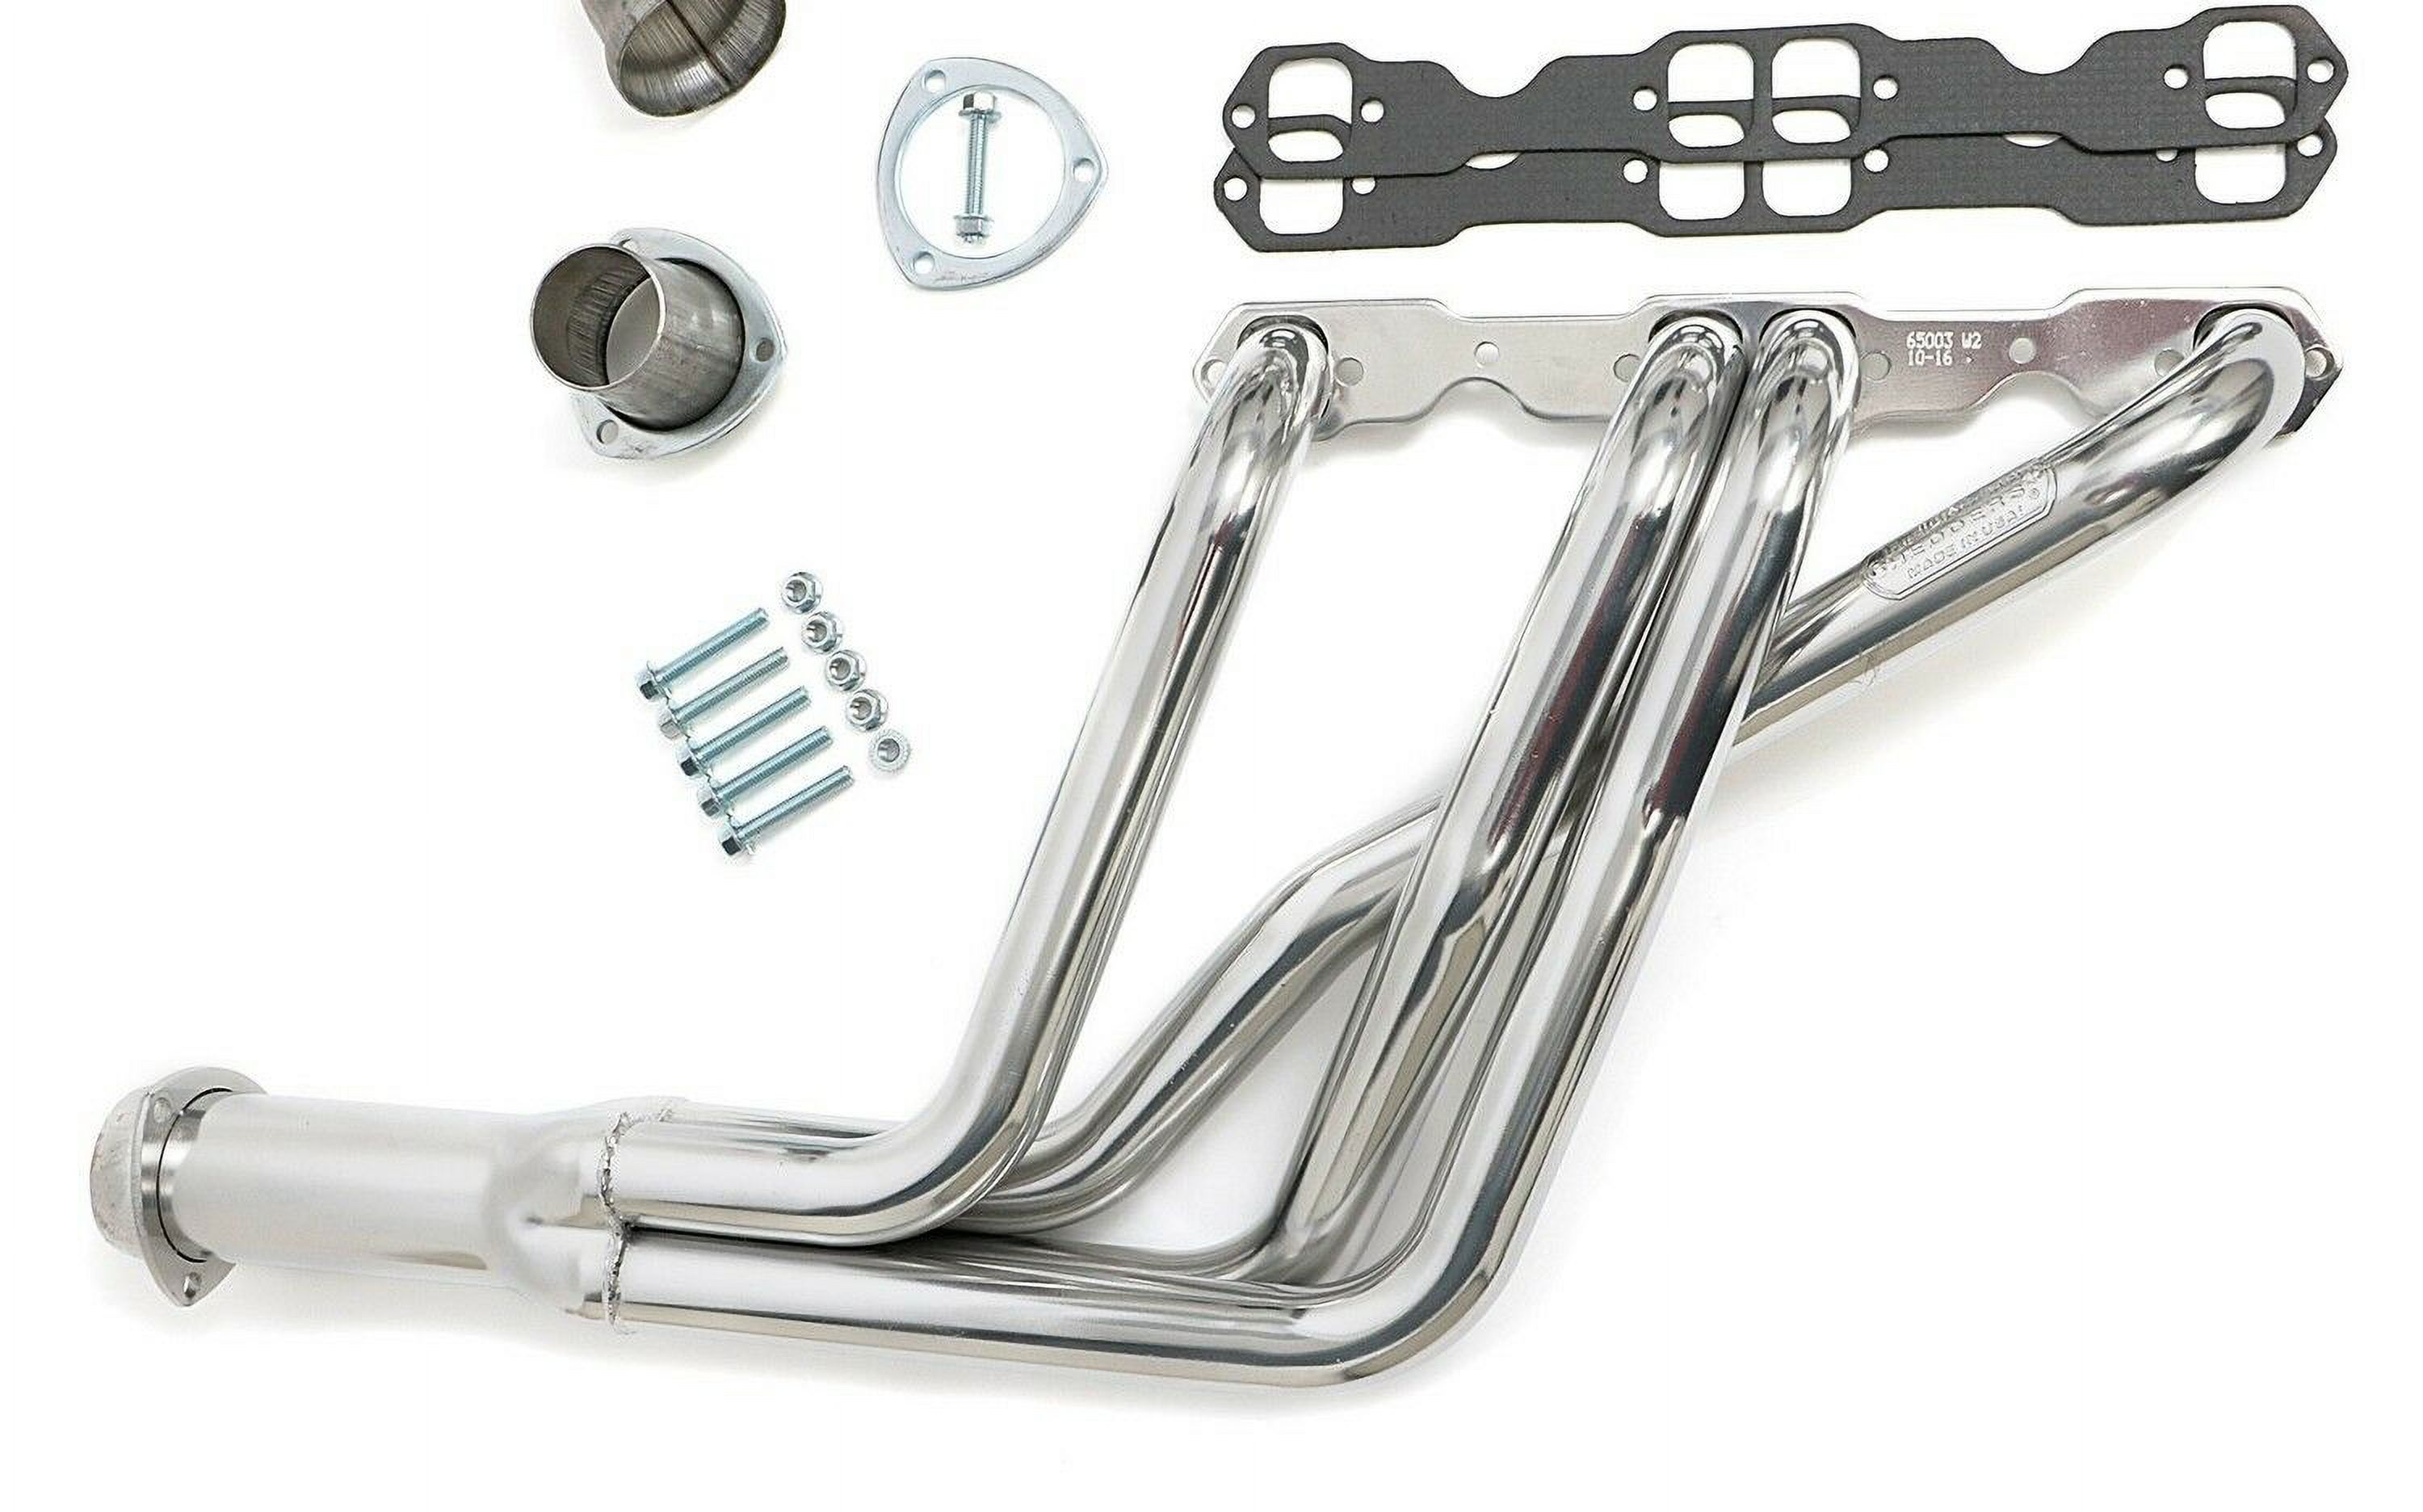 Hedman Hedders 66003 Standard Duty HTC Coated Headers; Tube Size 1.75 in.; Collector Size 3 in.; Long Tube; Incl. Headers/Gaskets/3 Bolt Adapter/Mtg. Hardware; Polished Ceramic Metallic; - image 3 of 4